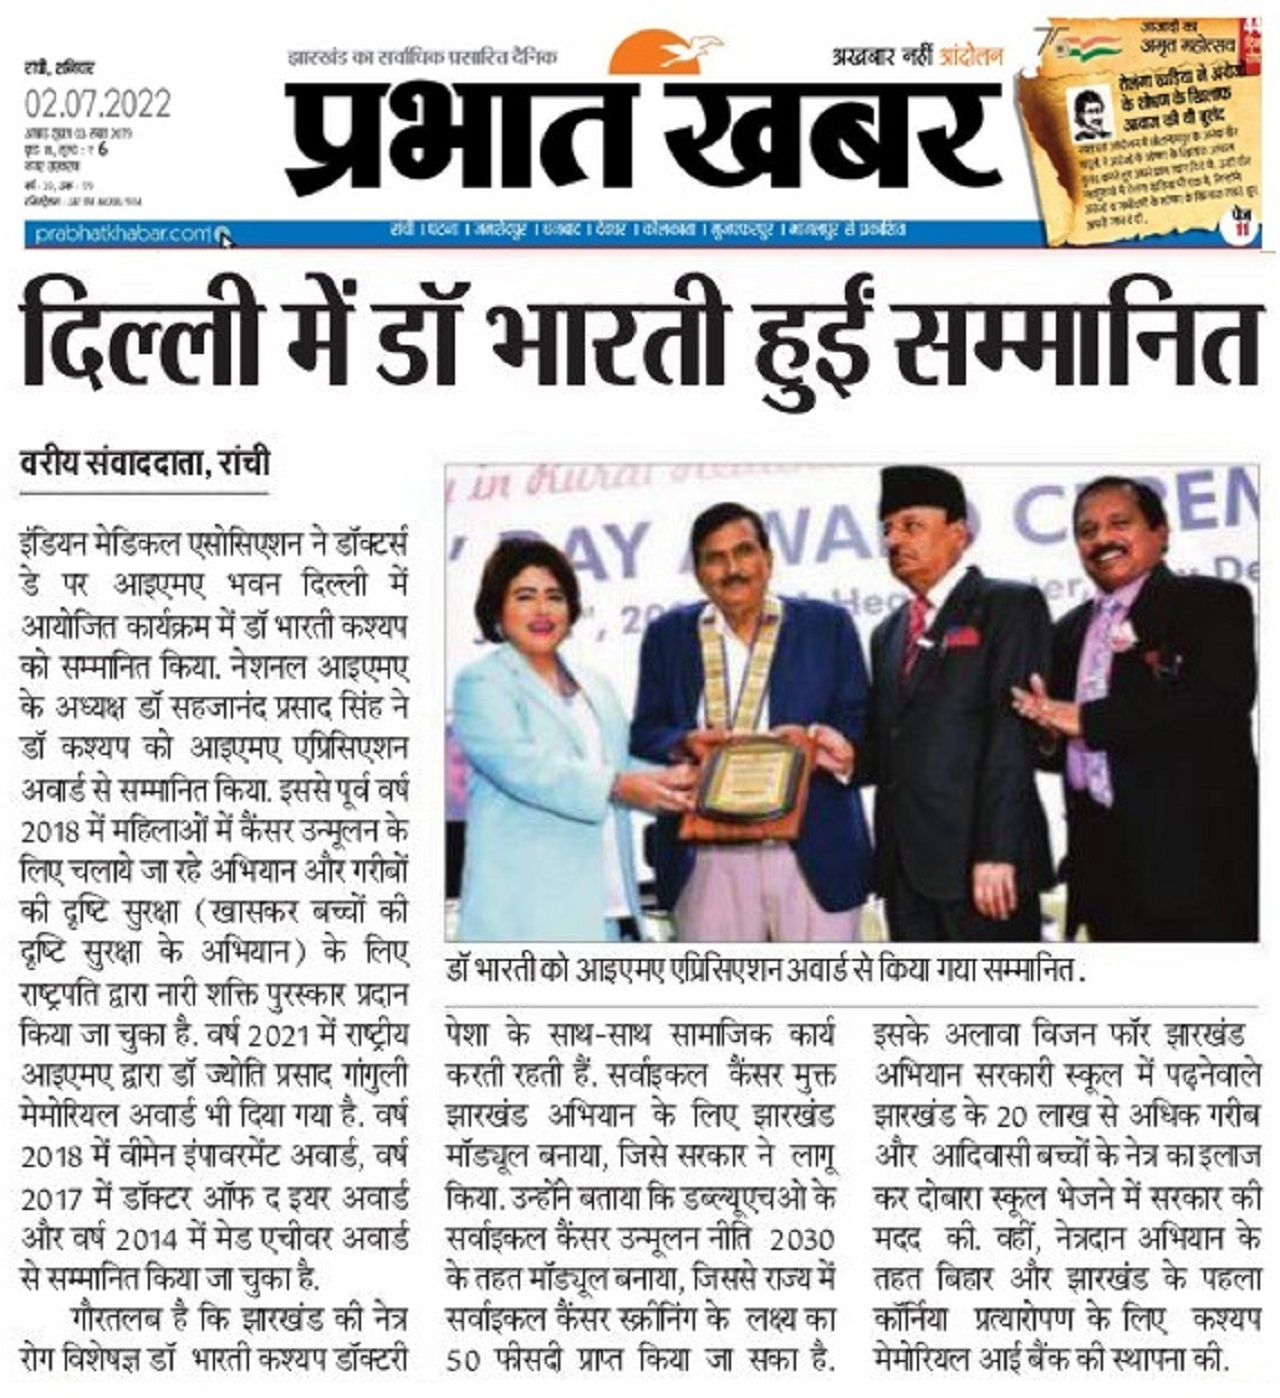 Dr. Bharti Kashyap:IMA Excellence Award – 2022 by National IMA on 01-07-2022